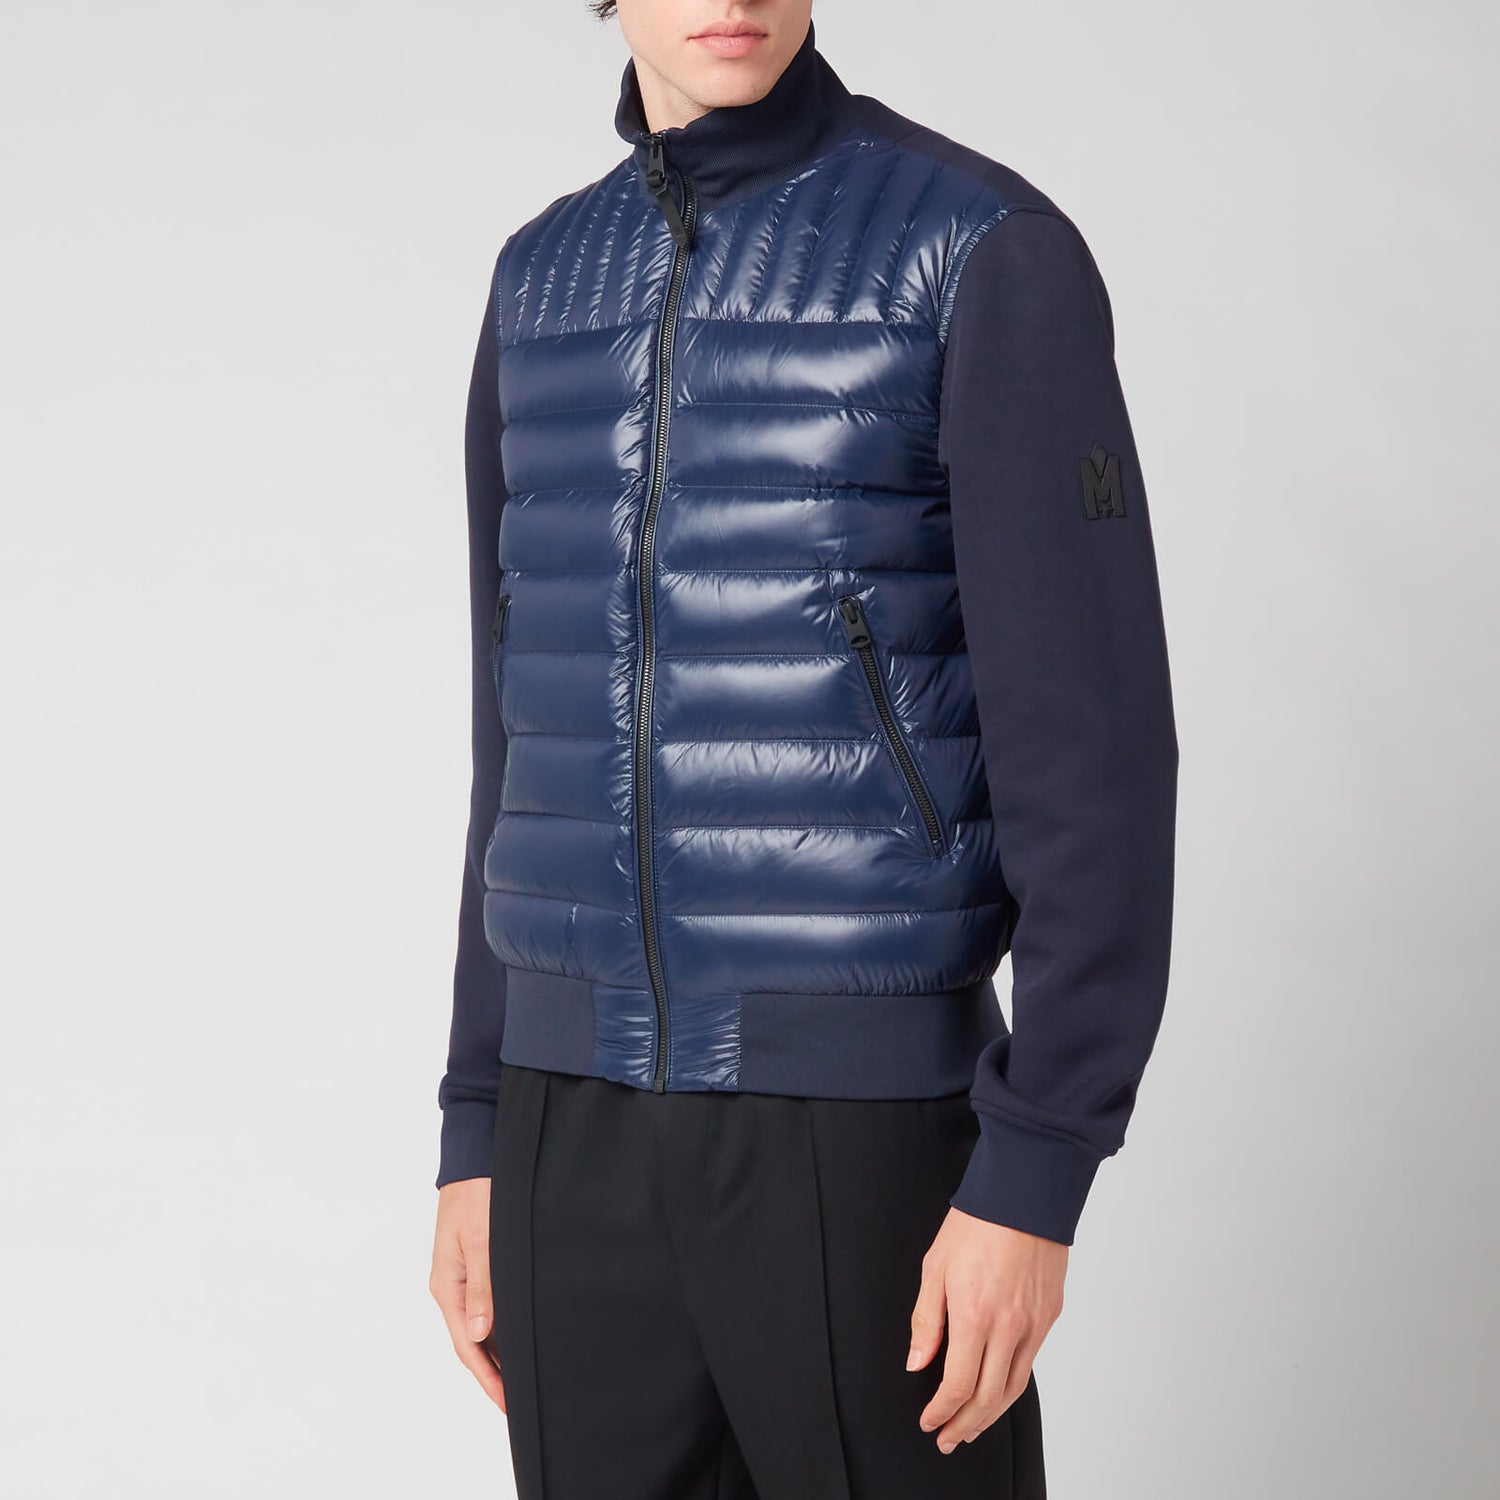 Mackage Men's Collin Bomber Jacket With Quilted Down Front Body - Navy - XXL